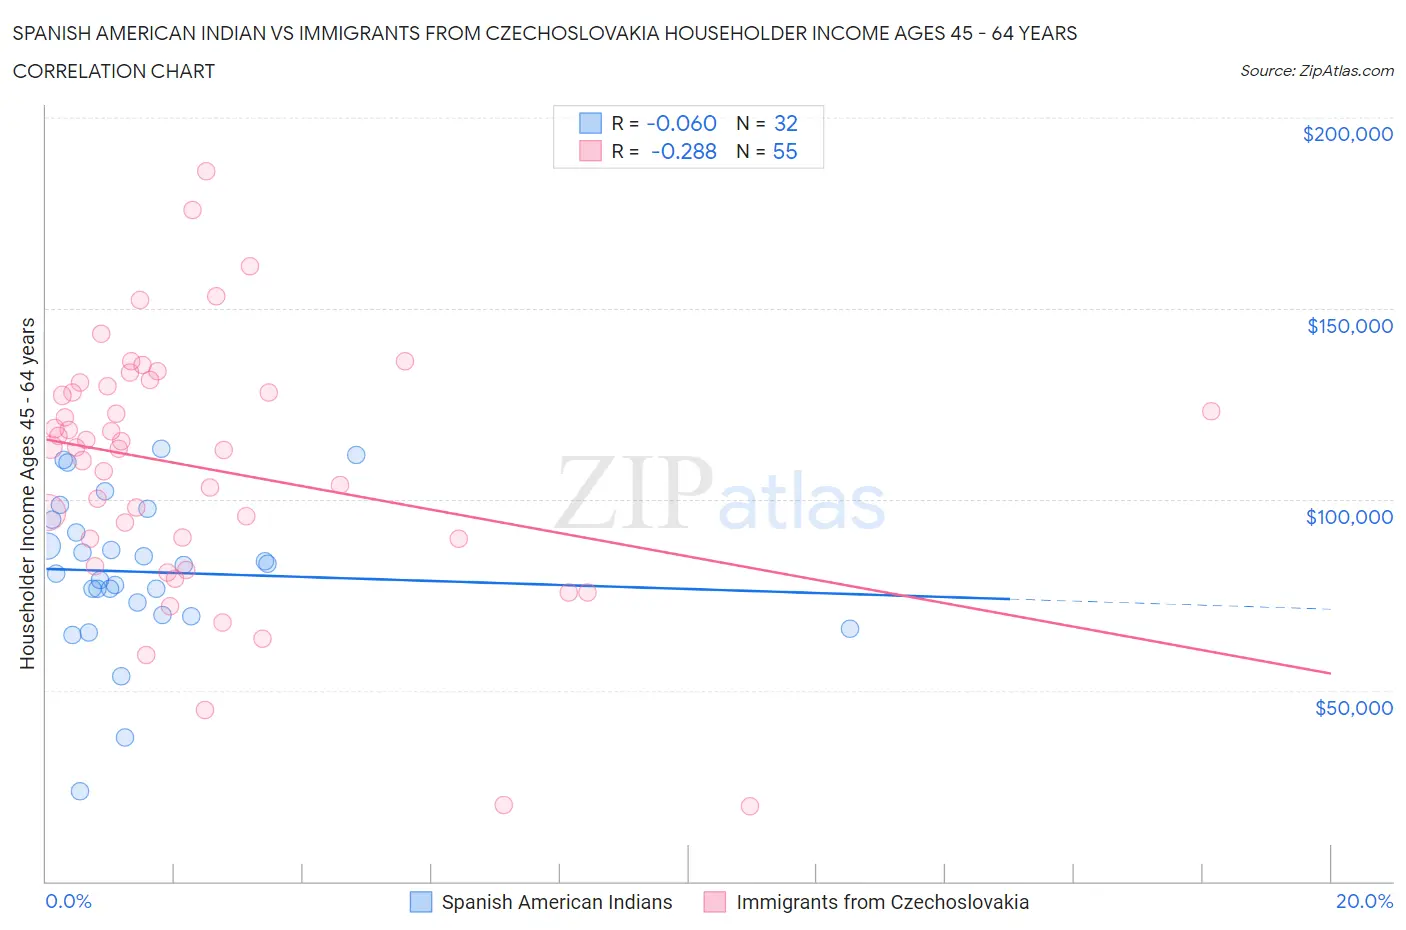 Spanish American Indian vs Immigrants from Czechoslovakia Householder Income Ages 45 - 64 years